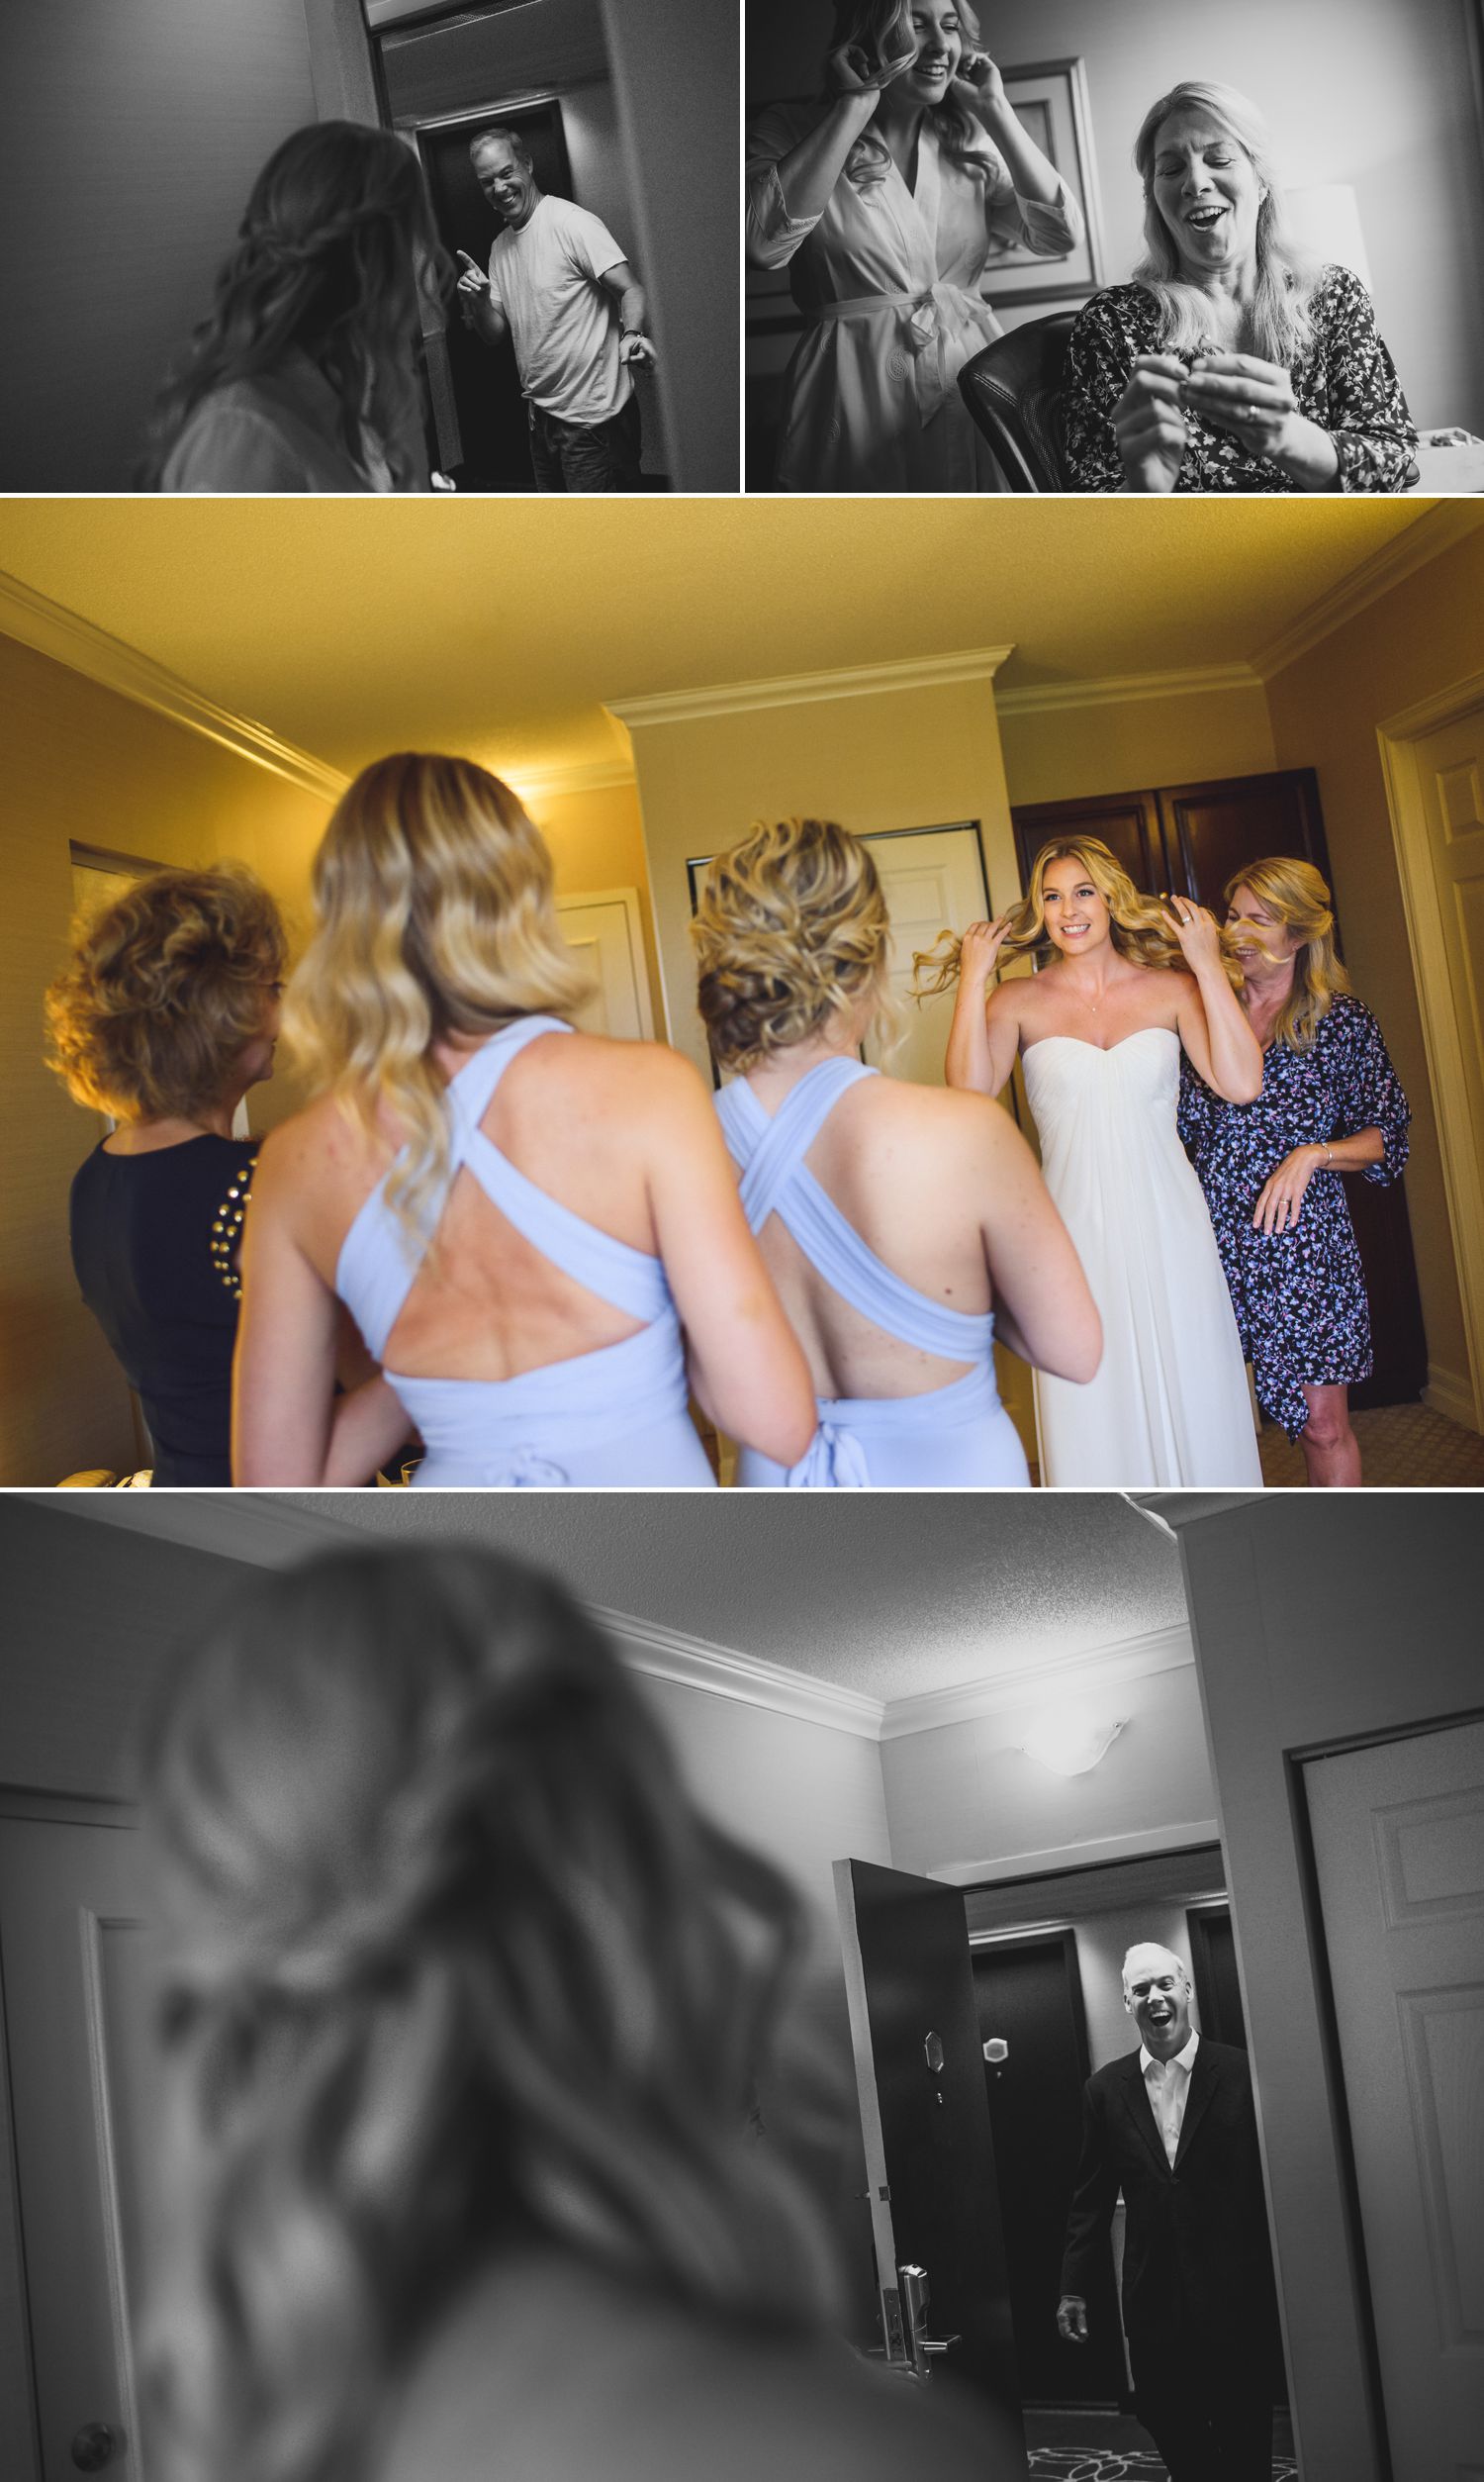 The bride with her bridesmaids and family getting ready at a Ottawa hotel